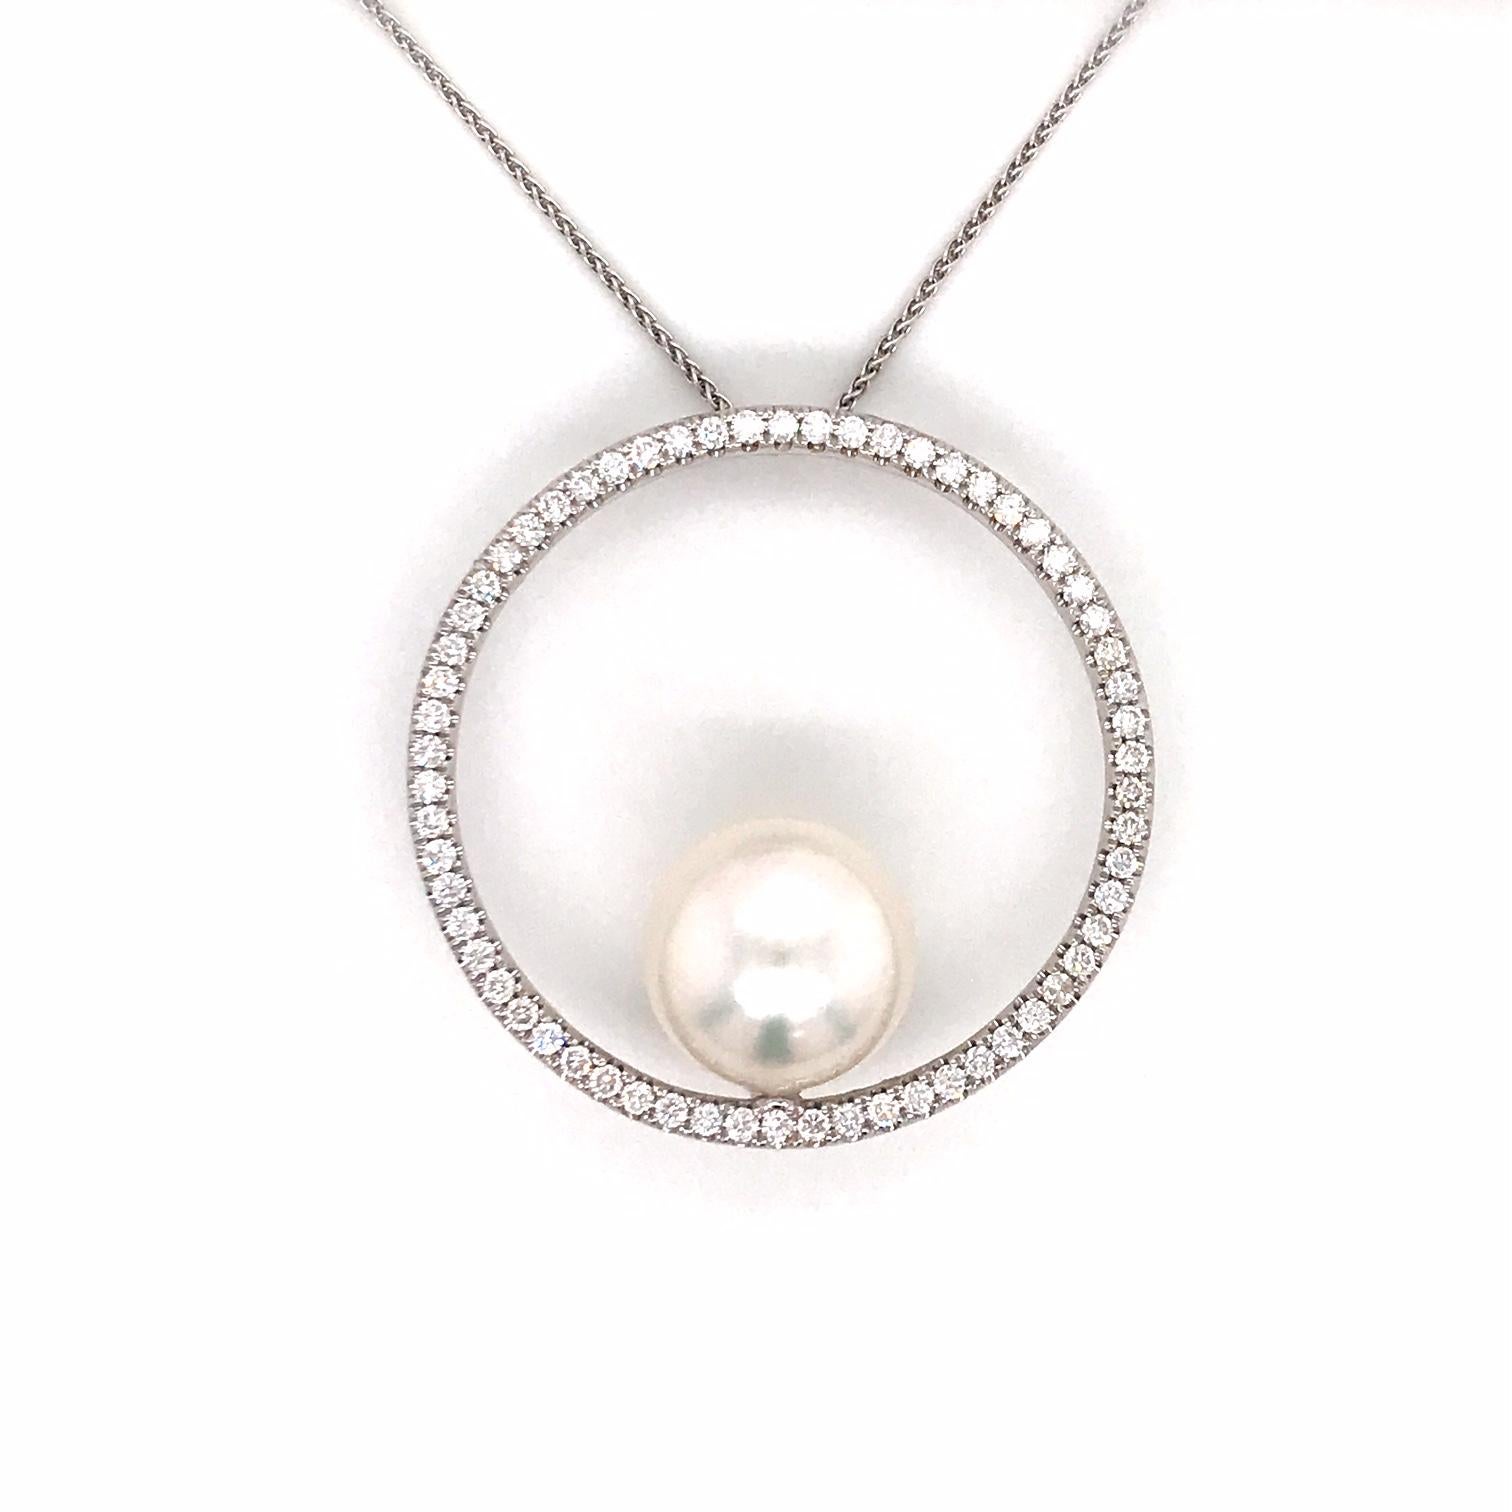 18K White gold pendant featuring one South Sea Pearl measuring 13-14 mm with a diamond circle containing 62 round brilliants weighing 1.04 carats. 
Color G-H
Clarity SI

Pearl can be changed to a Pink, Golden or Tahitian Pearl upon request. Price